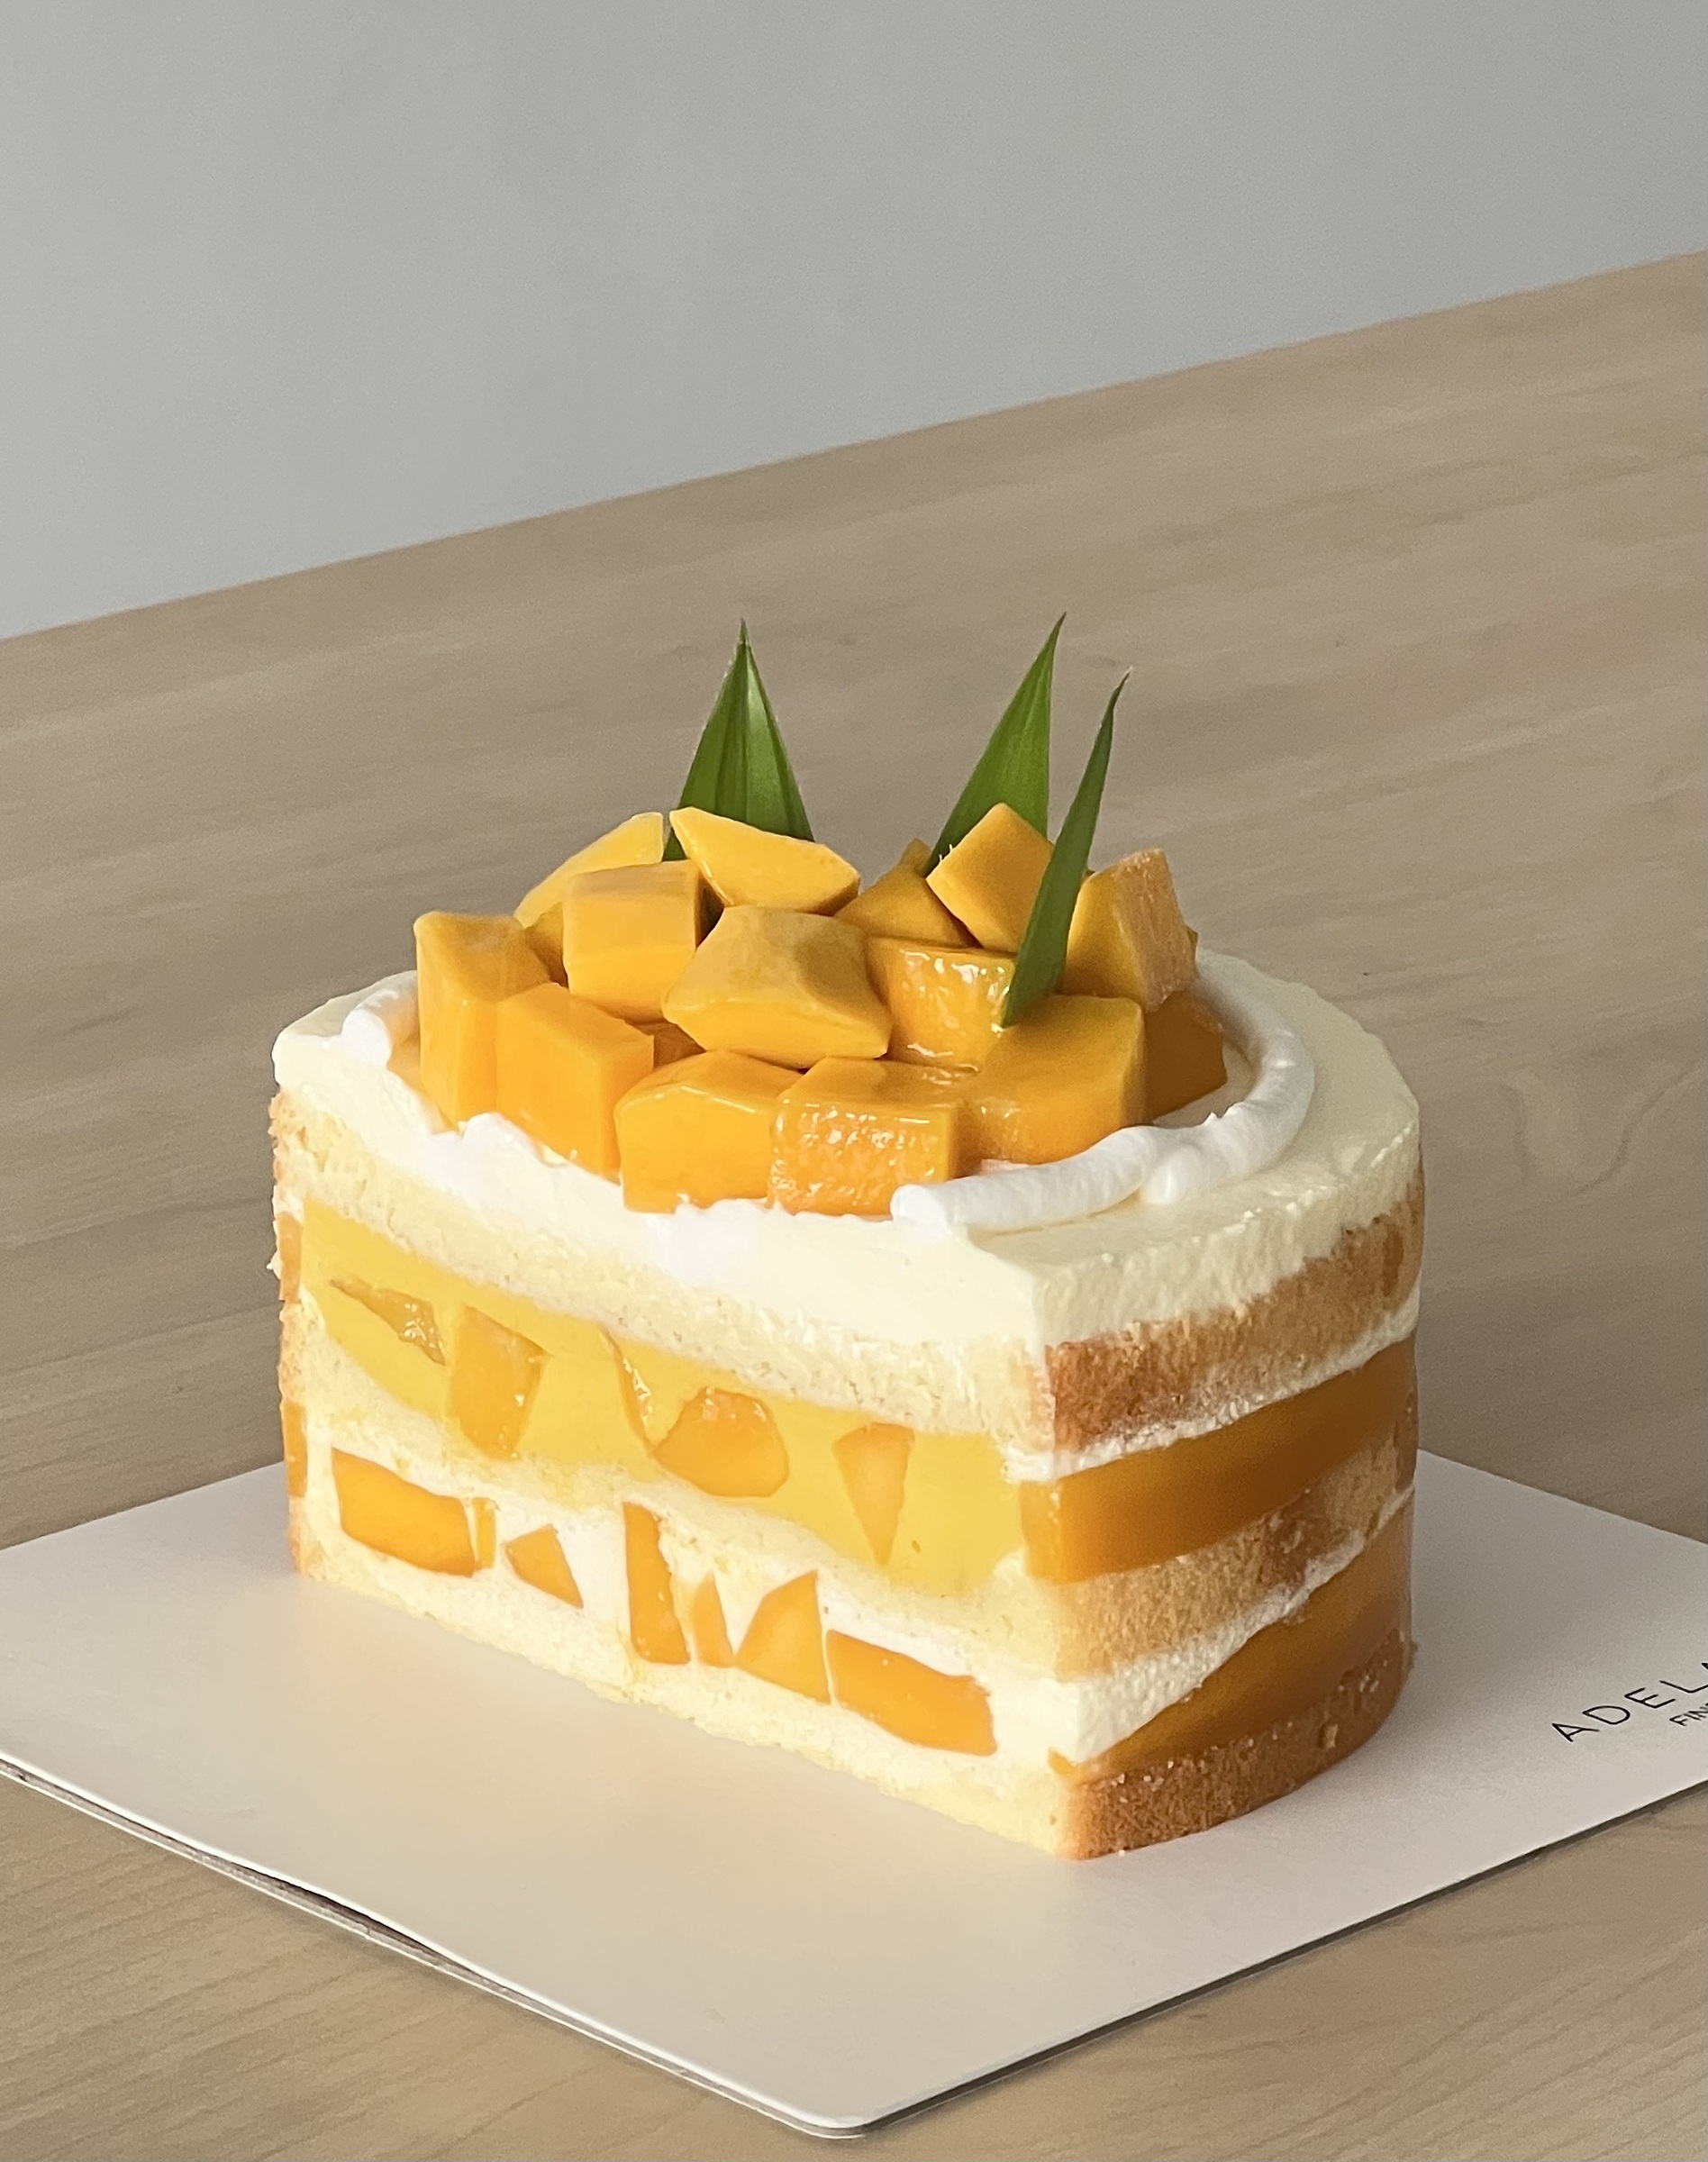 12 Highly Rated Bugis Cake Shop For Tasty Desserts - Valerie Seow